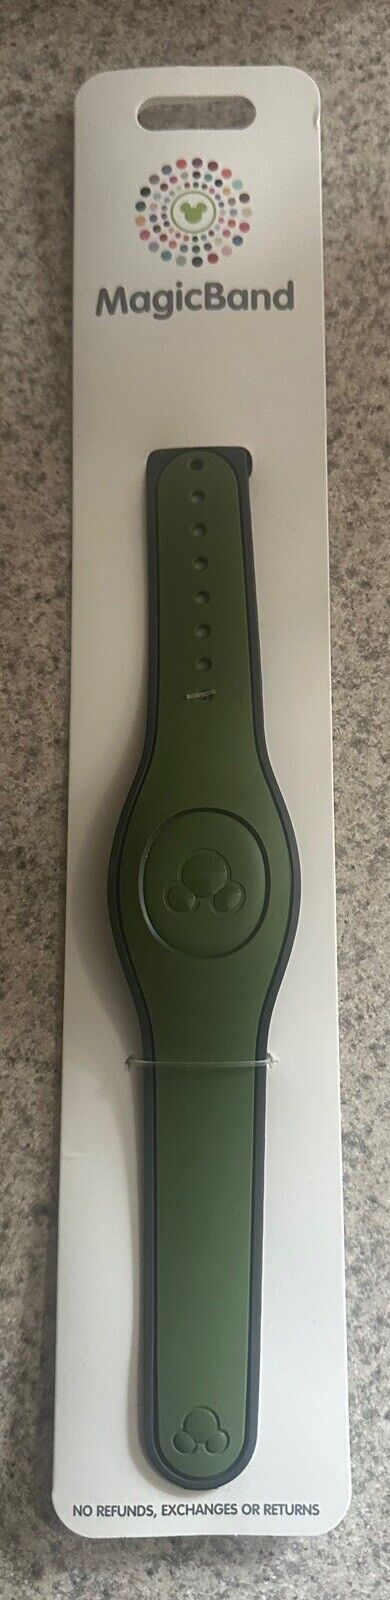 Disney Mickey Mouse MagicBand